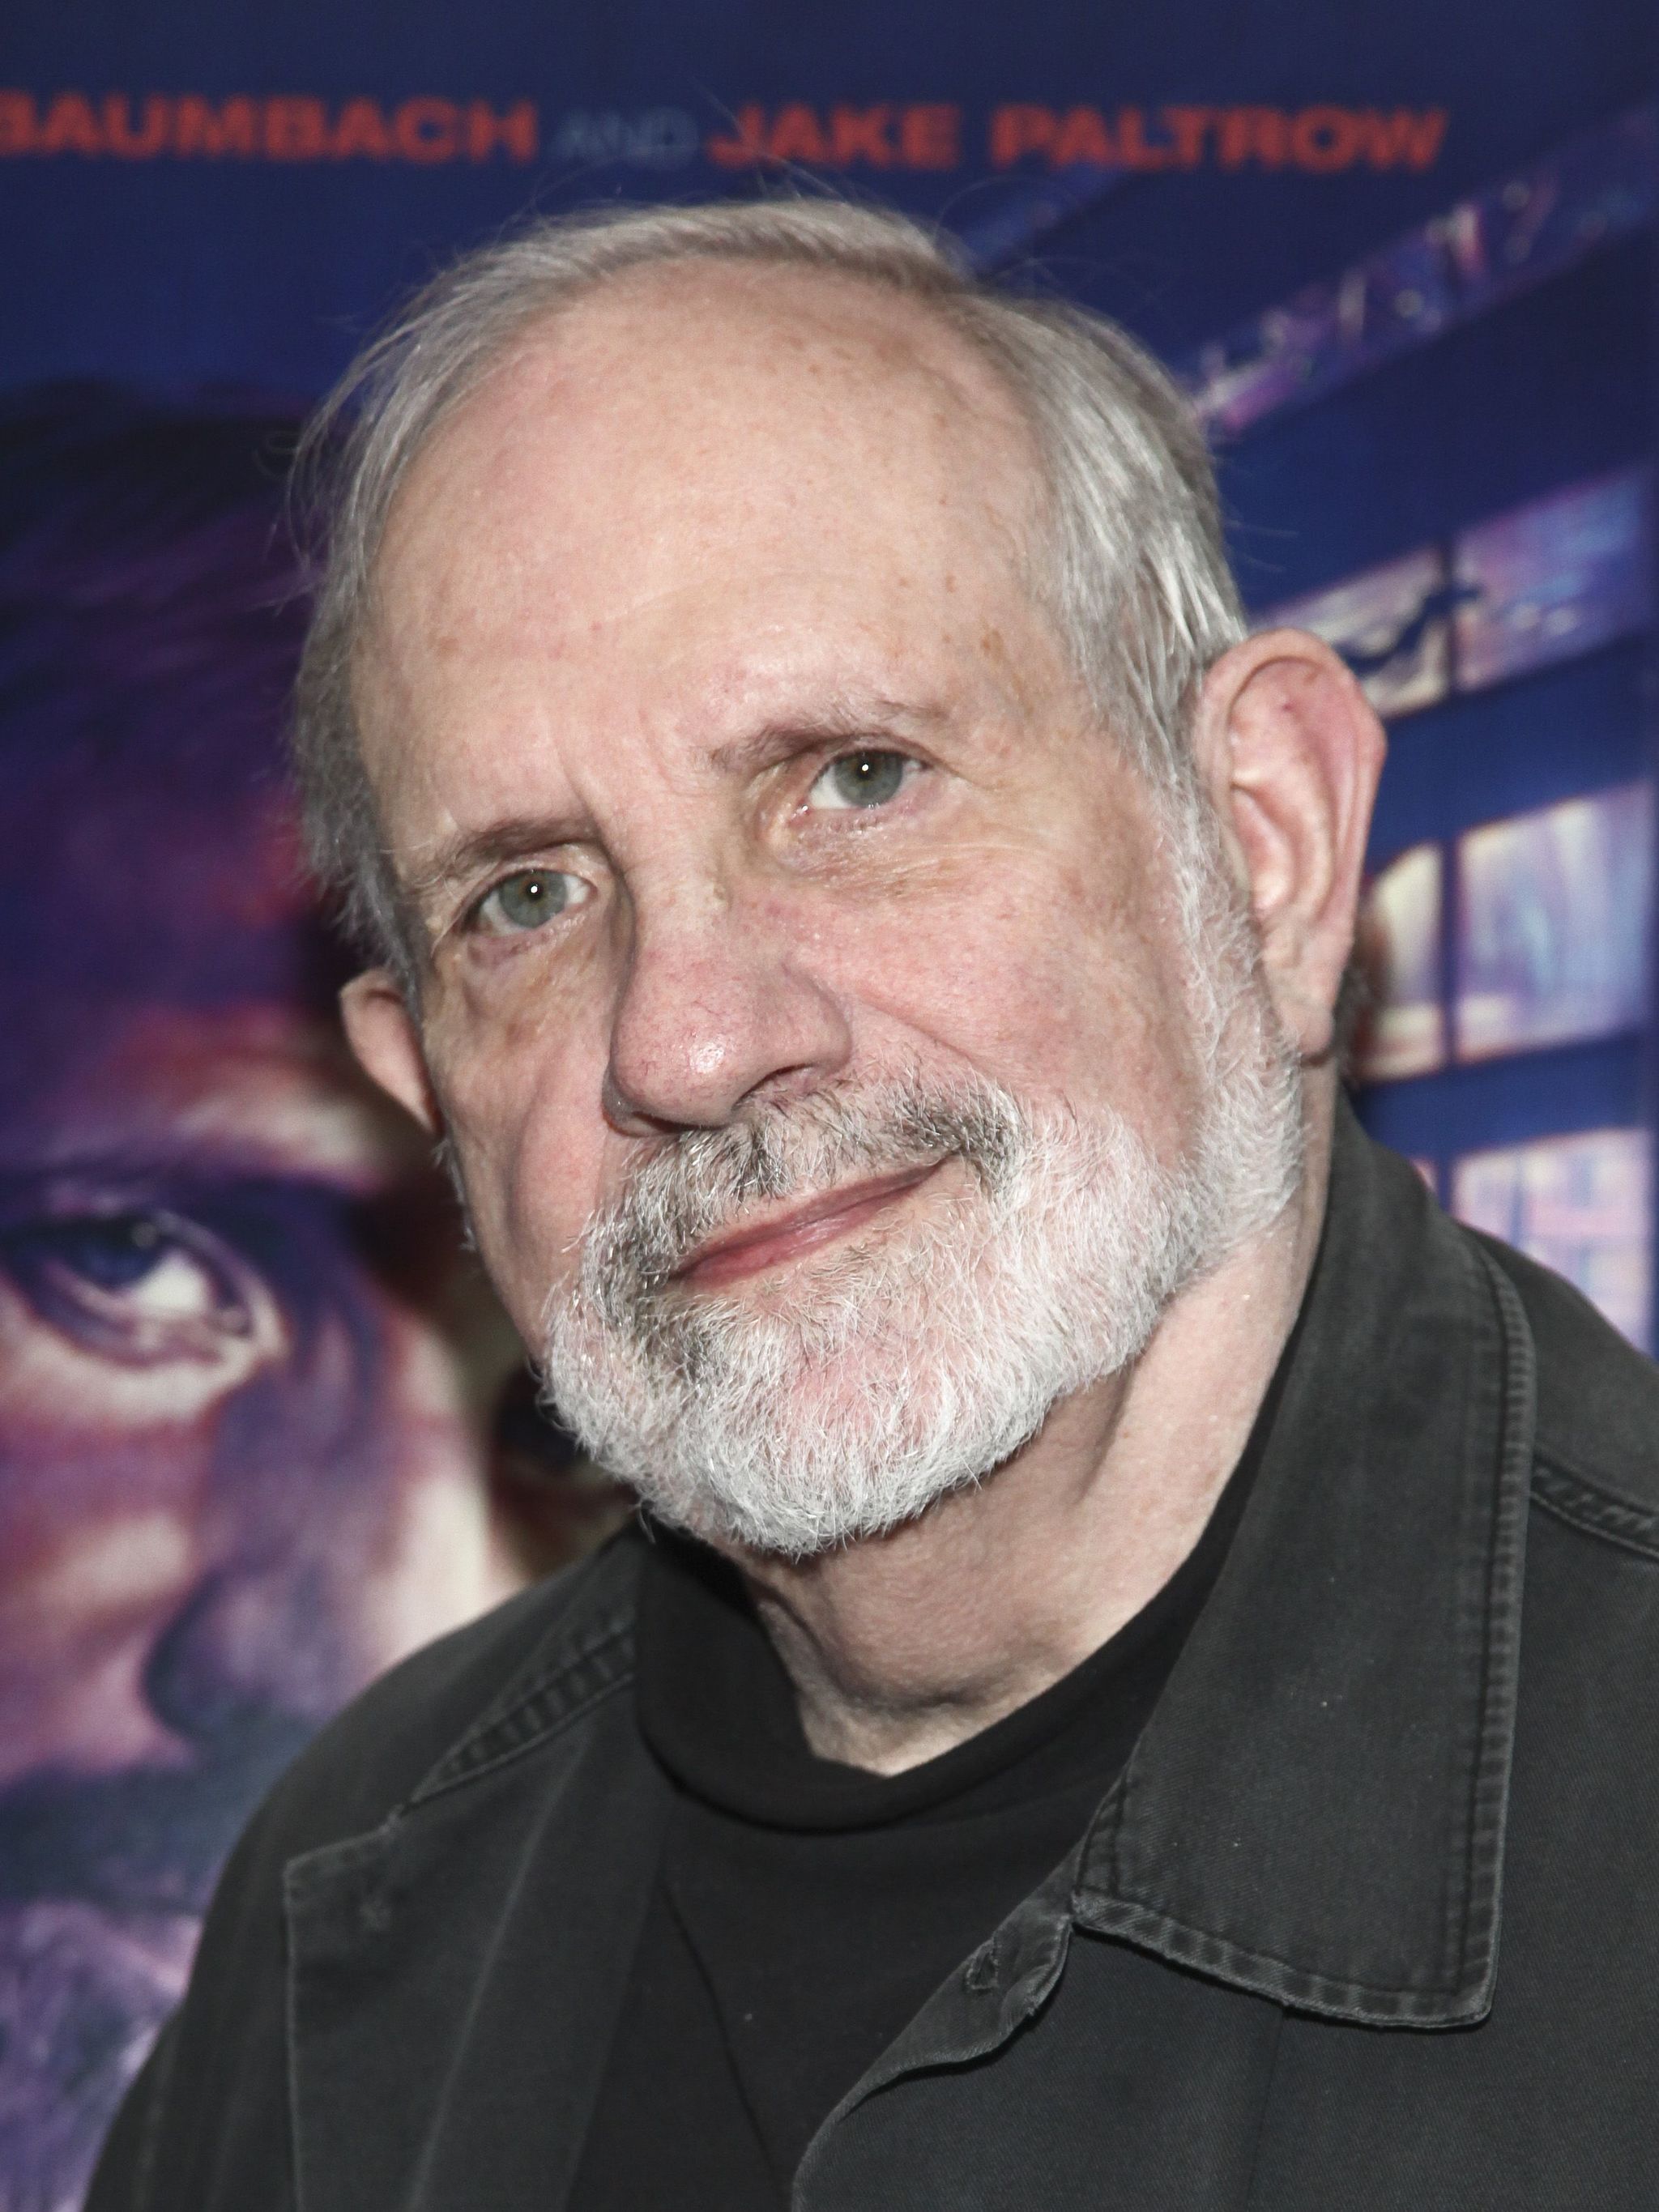 Brian De Palma attends a special screening of “De Palma” in New York. The documentary on the filmmaker will be interesting for movie lovers.